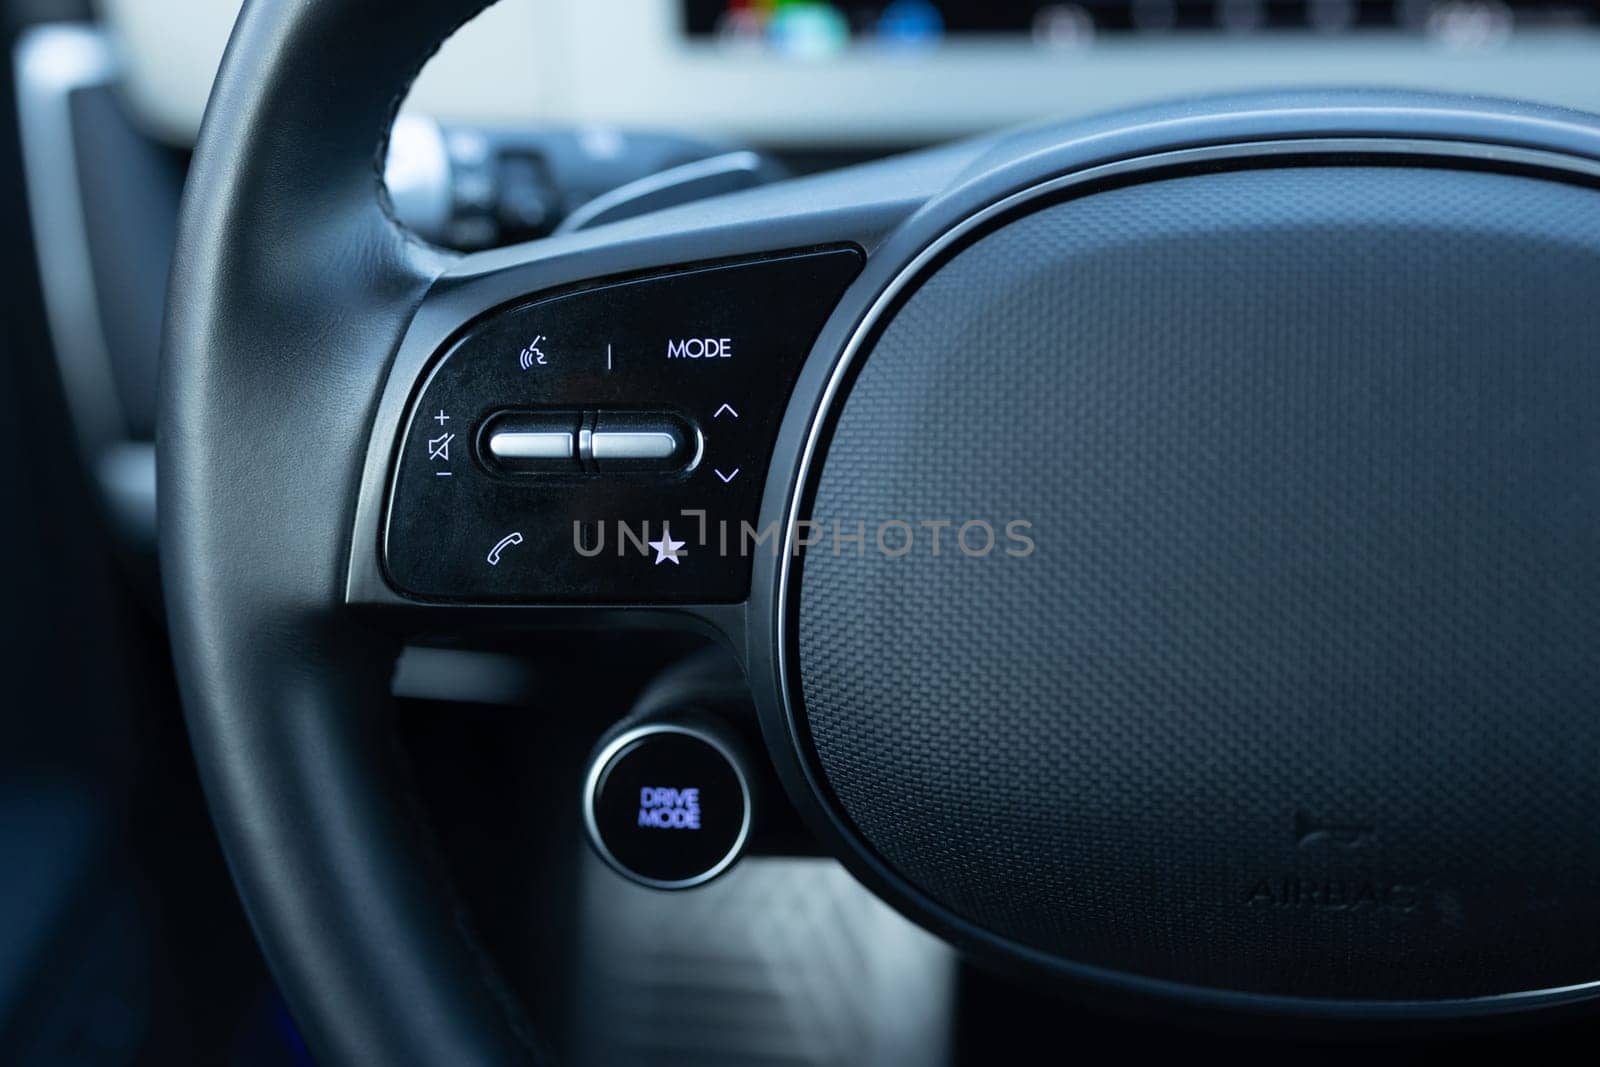 Close-up view of car interior. View of steering wheel of car control music. Volume button of car radio on steering wheel. Turns up the volume of the music in the car. Drive mode by uflypro